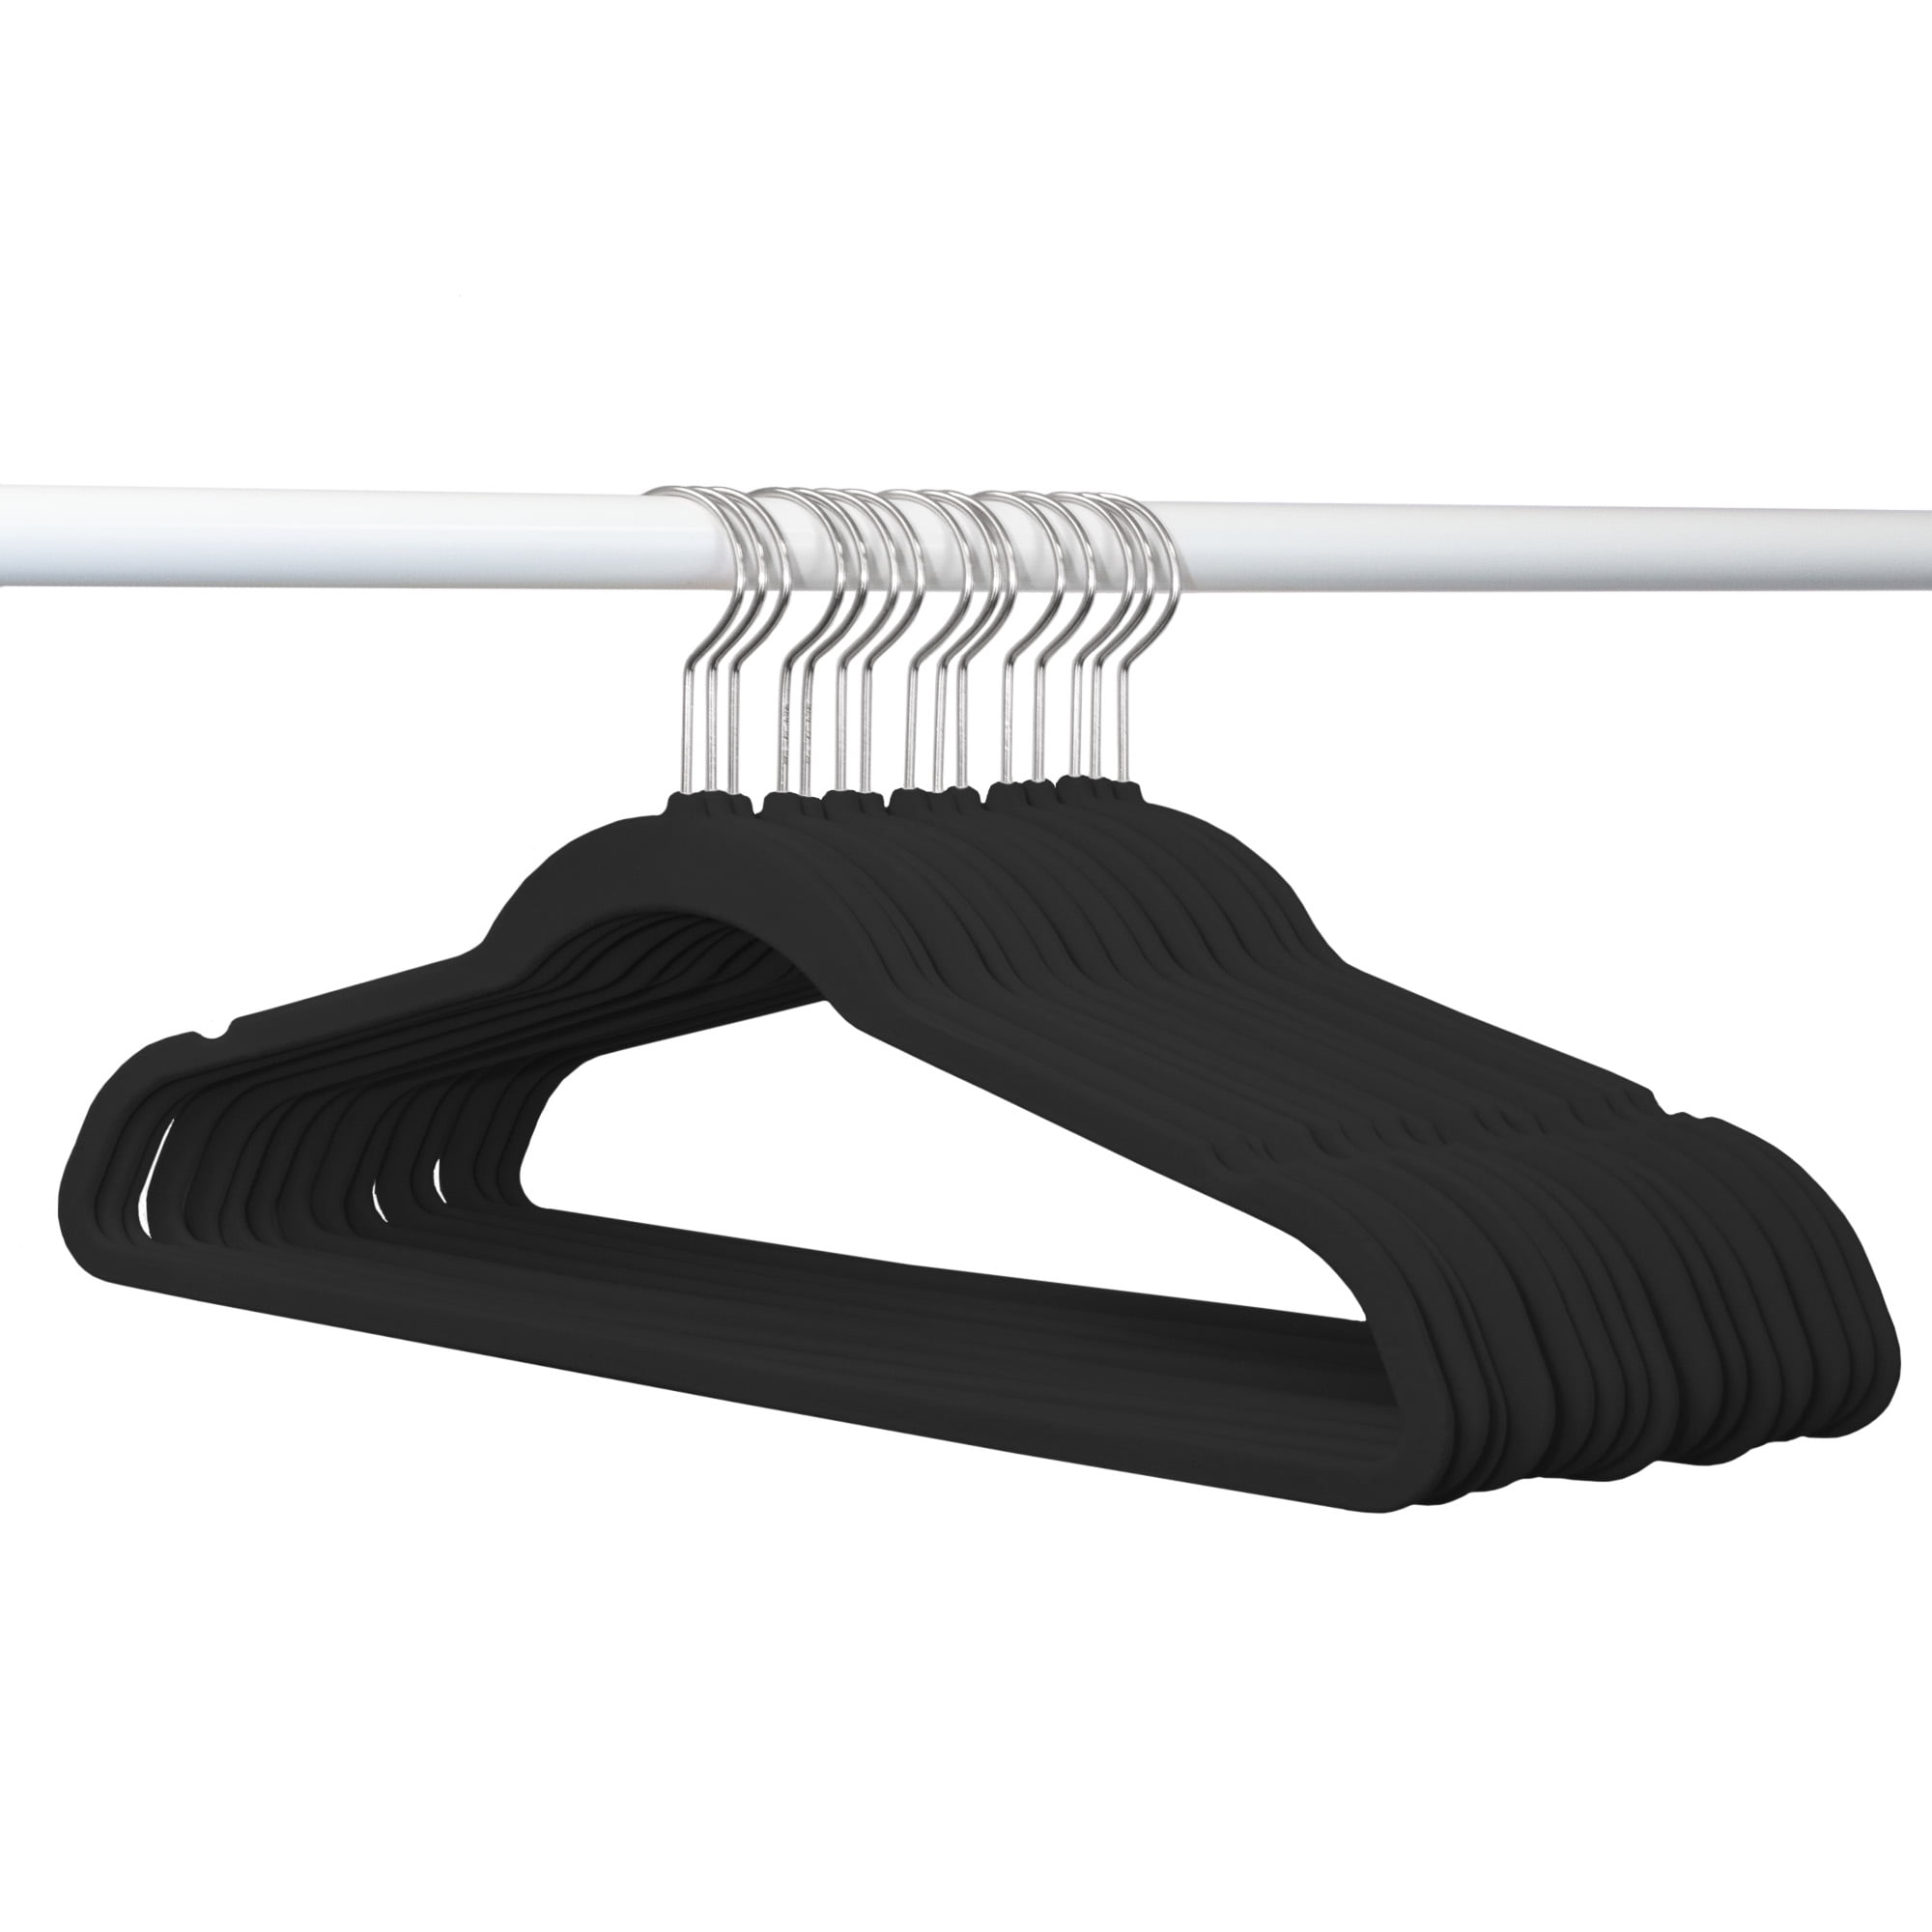 Closet Complete 50 Pack 'Elite Quality' Velvet hangers - Black with Gold  Hooks (more colors available) 